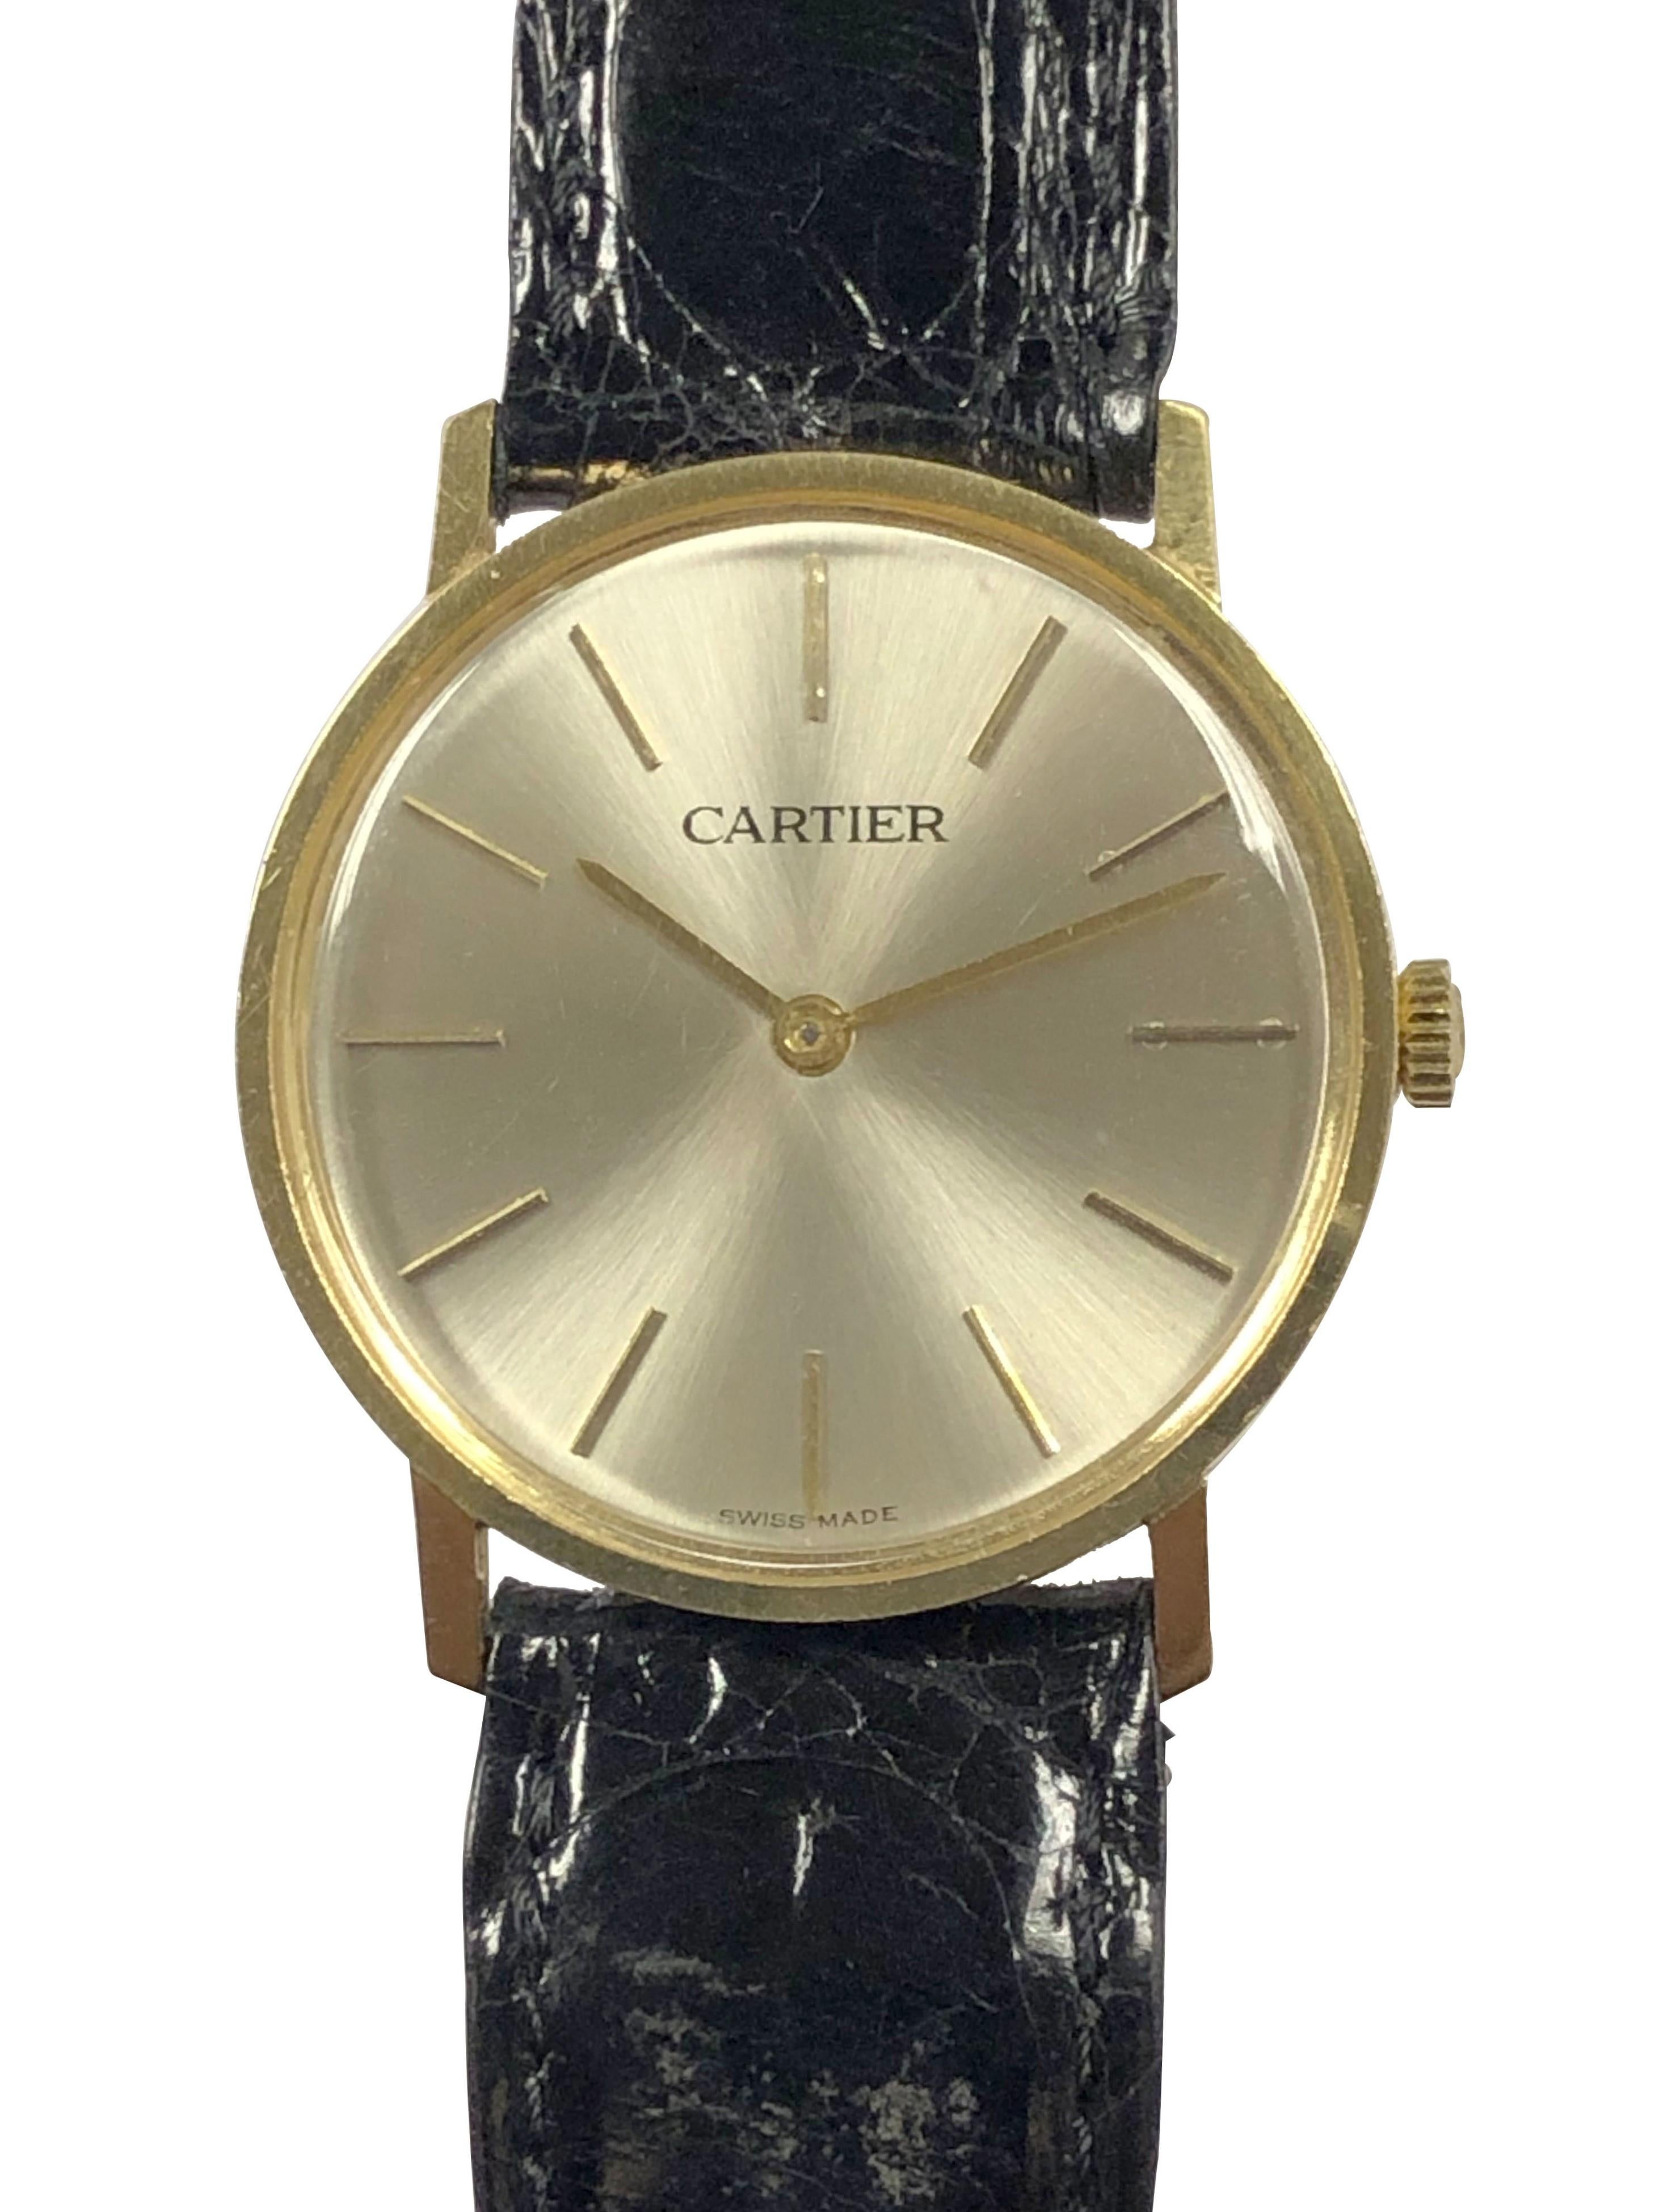 Circa 1960 Cartier Mid Size Wrist Watch, 30 M.M. X 6 M.M thick 18k Yellow Gold 2 piece case, Cartier Inc. 17 jewel mechanical, Manual wind movement. Silver Satin Dial with raised Gold markers. New De Beer Black Crocodile  Strap with a Cartier Gold